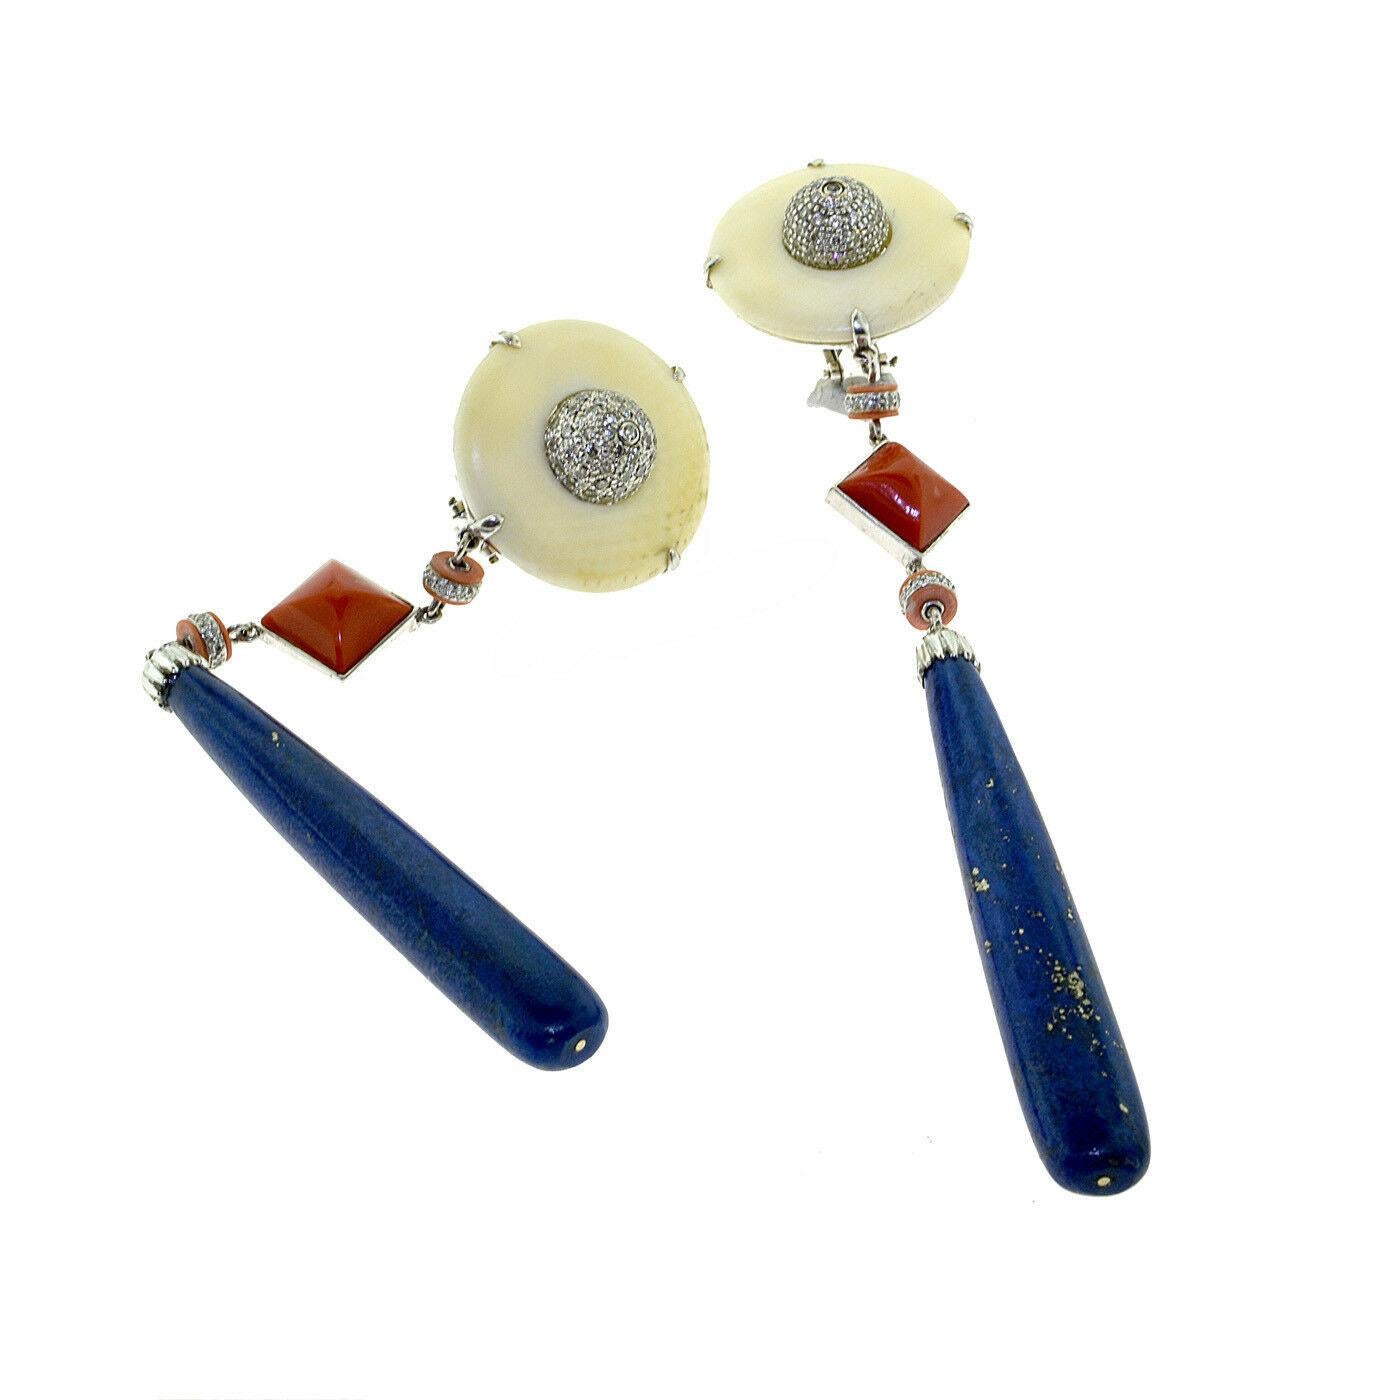 Brilliance Jewels, Miami
Questions? Call Us Anytime!
786,482,8100

Style: Art Deco, Drop/Dangle Earrings

Metal: White Gold

Metal Purity: 18k

Stones:      White Coral

Red Coral

Lapis Lazuli

Diamonds (Round Brilliant Cut)

Total Item Weight